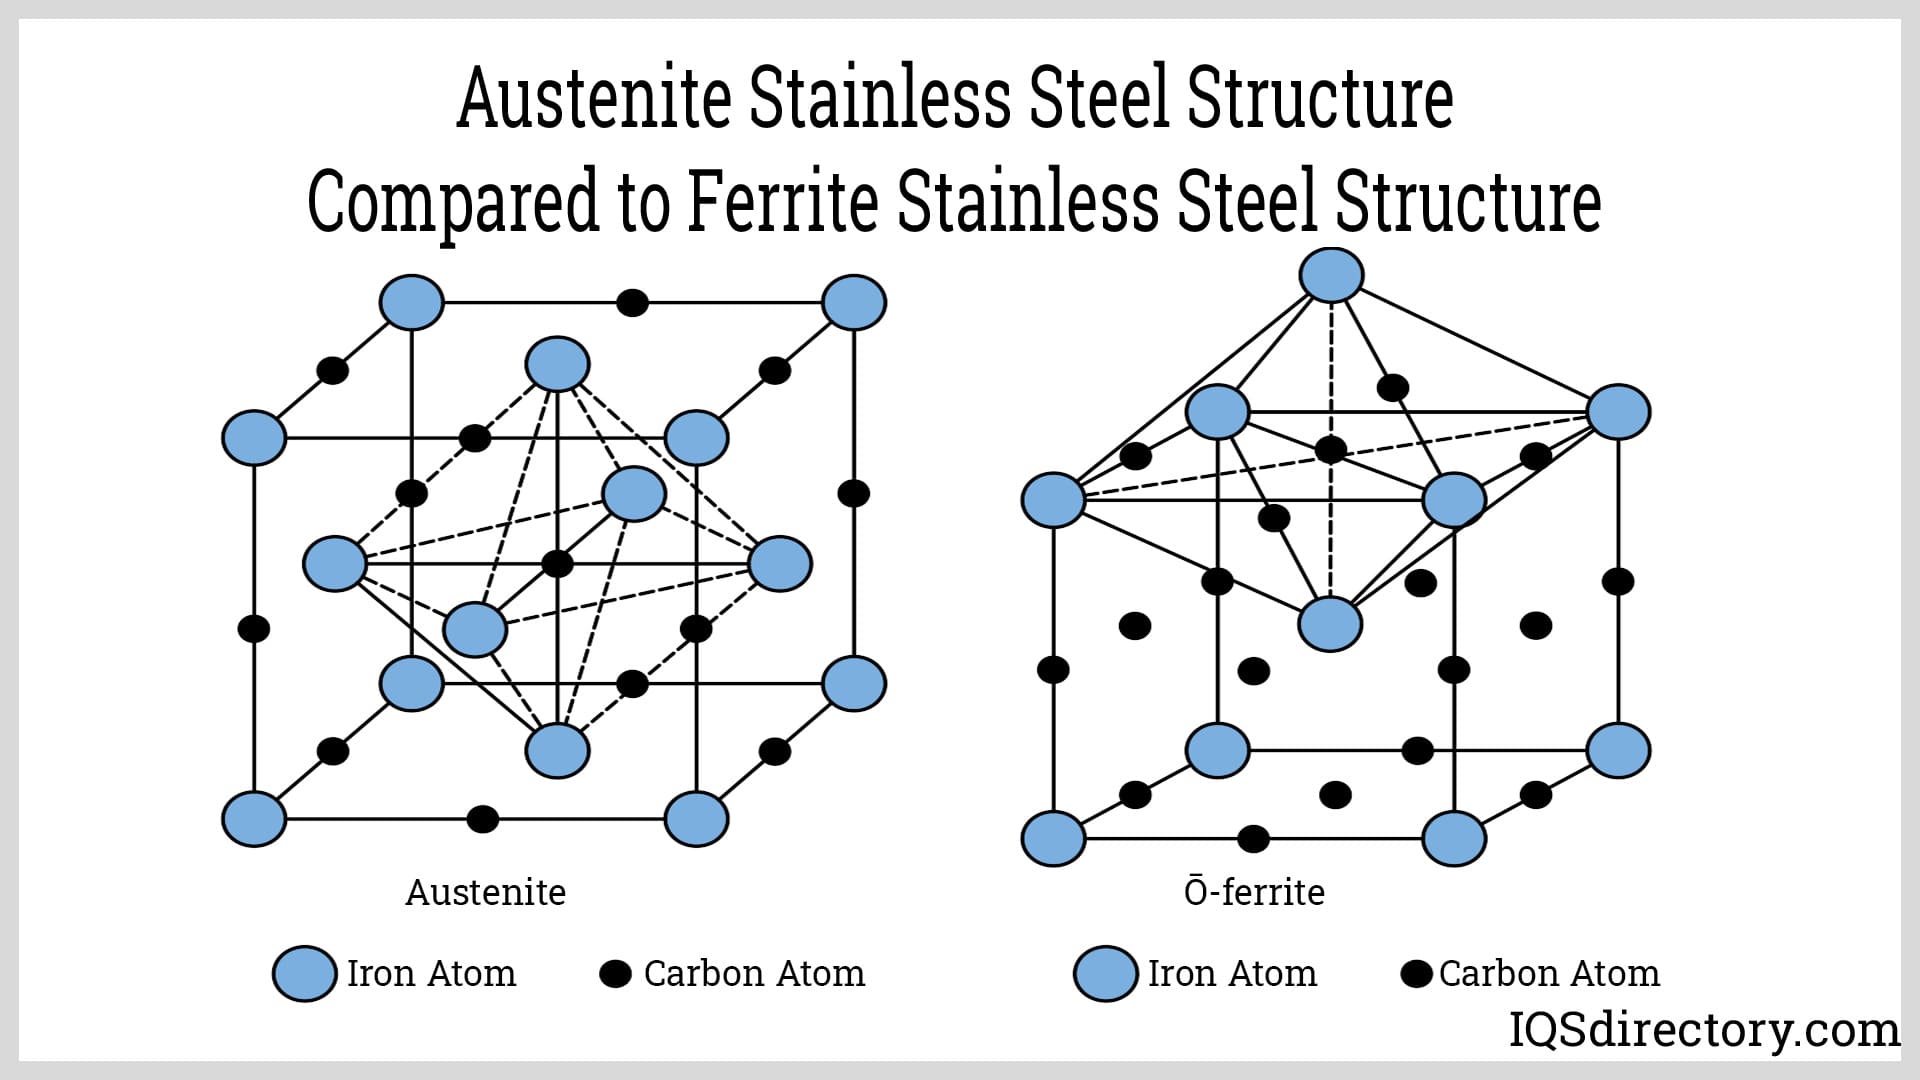 Austenite Stainless Steel Structure Compared to Ferrite Stainless Steel